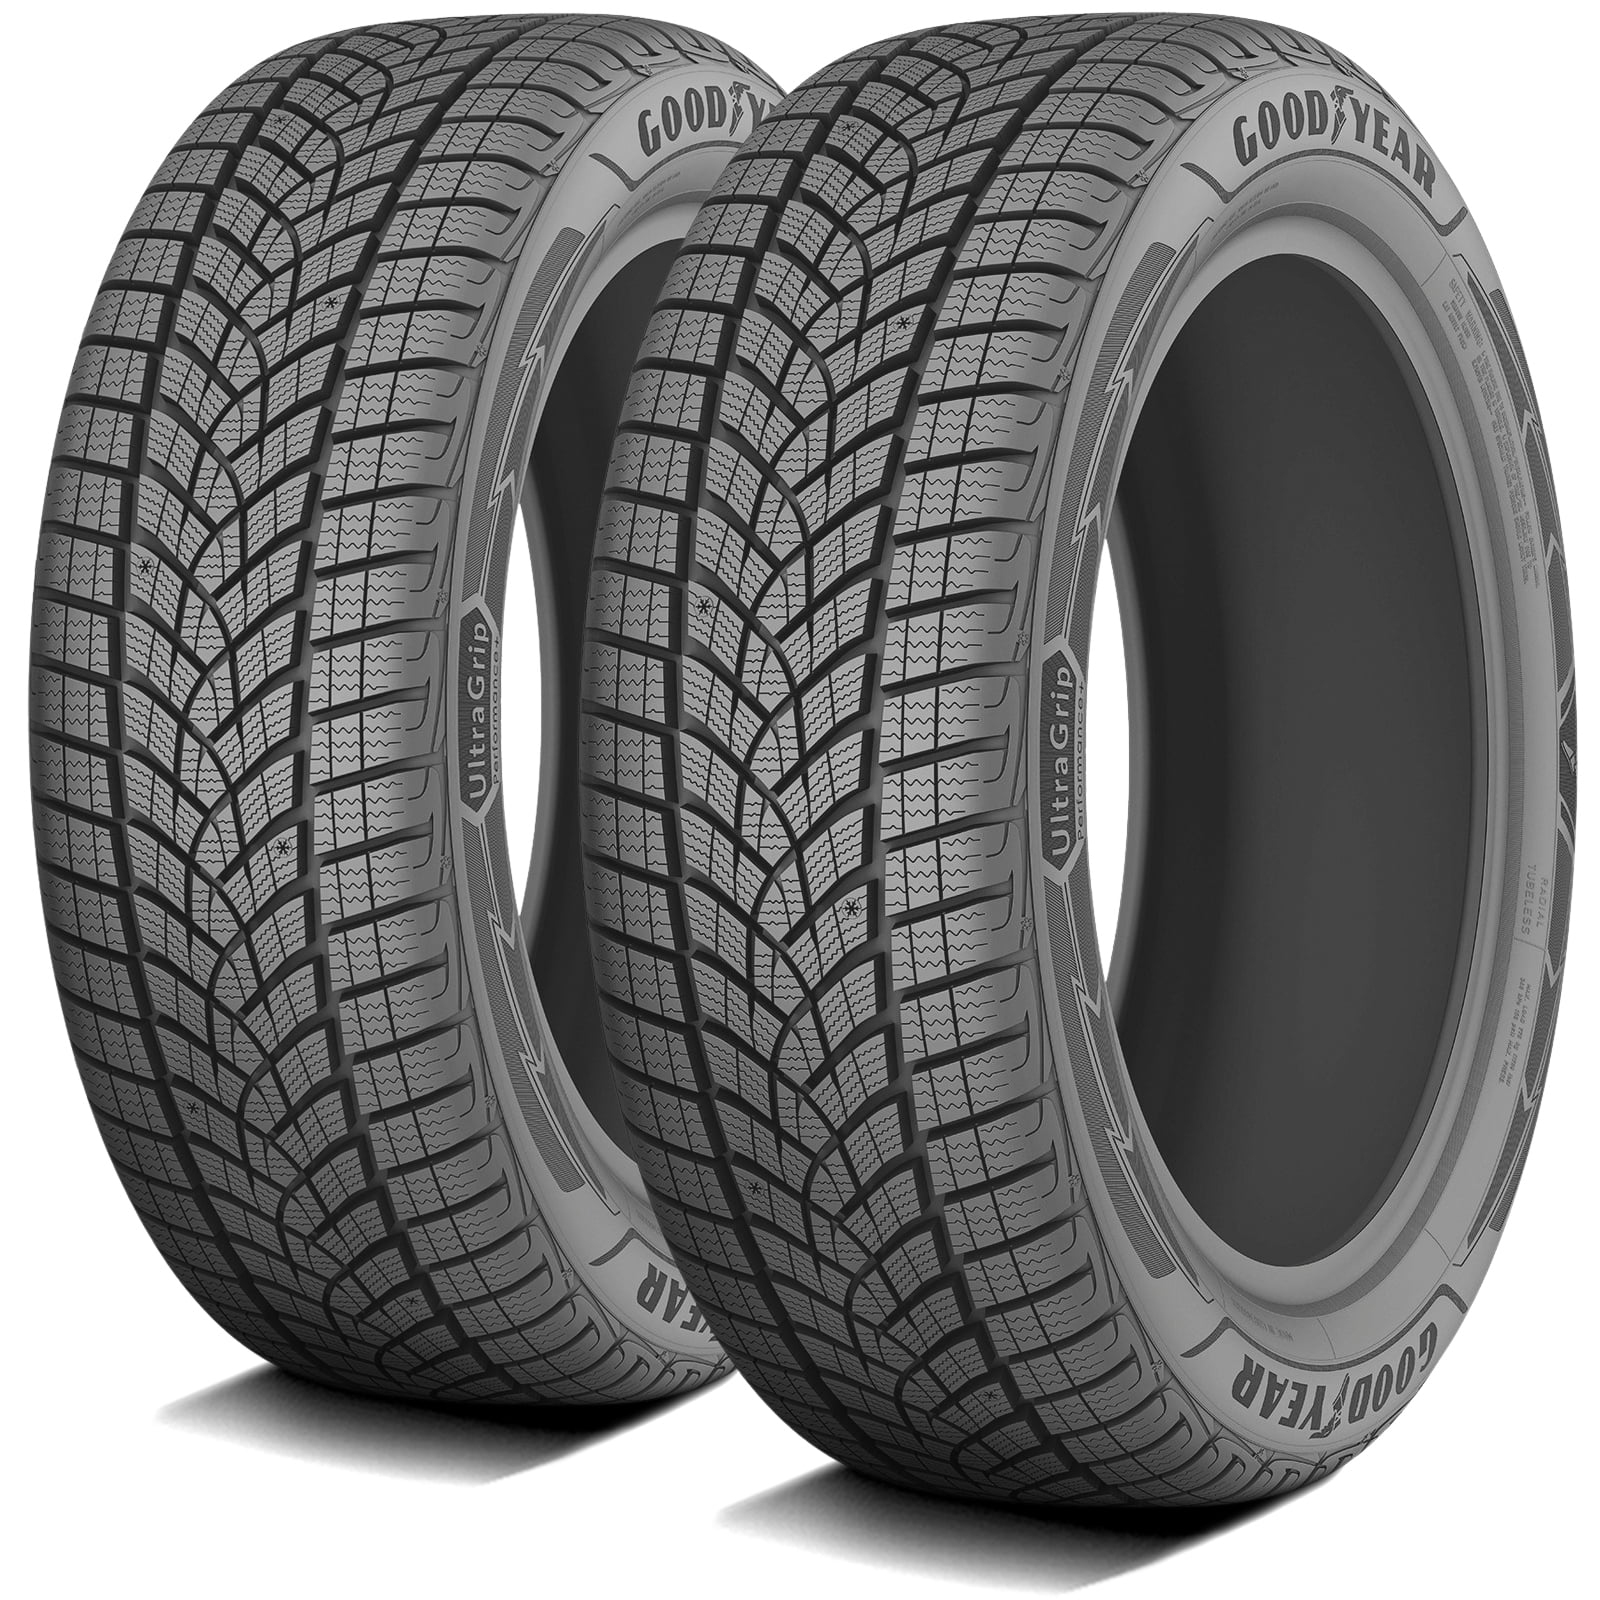 One Tire Goodyear Ultra Grip Performance + SUV 225/55R19 99V Studless  Winter Fits: 2013-16 Mazda CX-5 Grand Touring, 2020 Ford Escape Titanium  Plug-In Hybrid